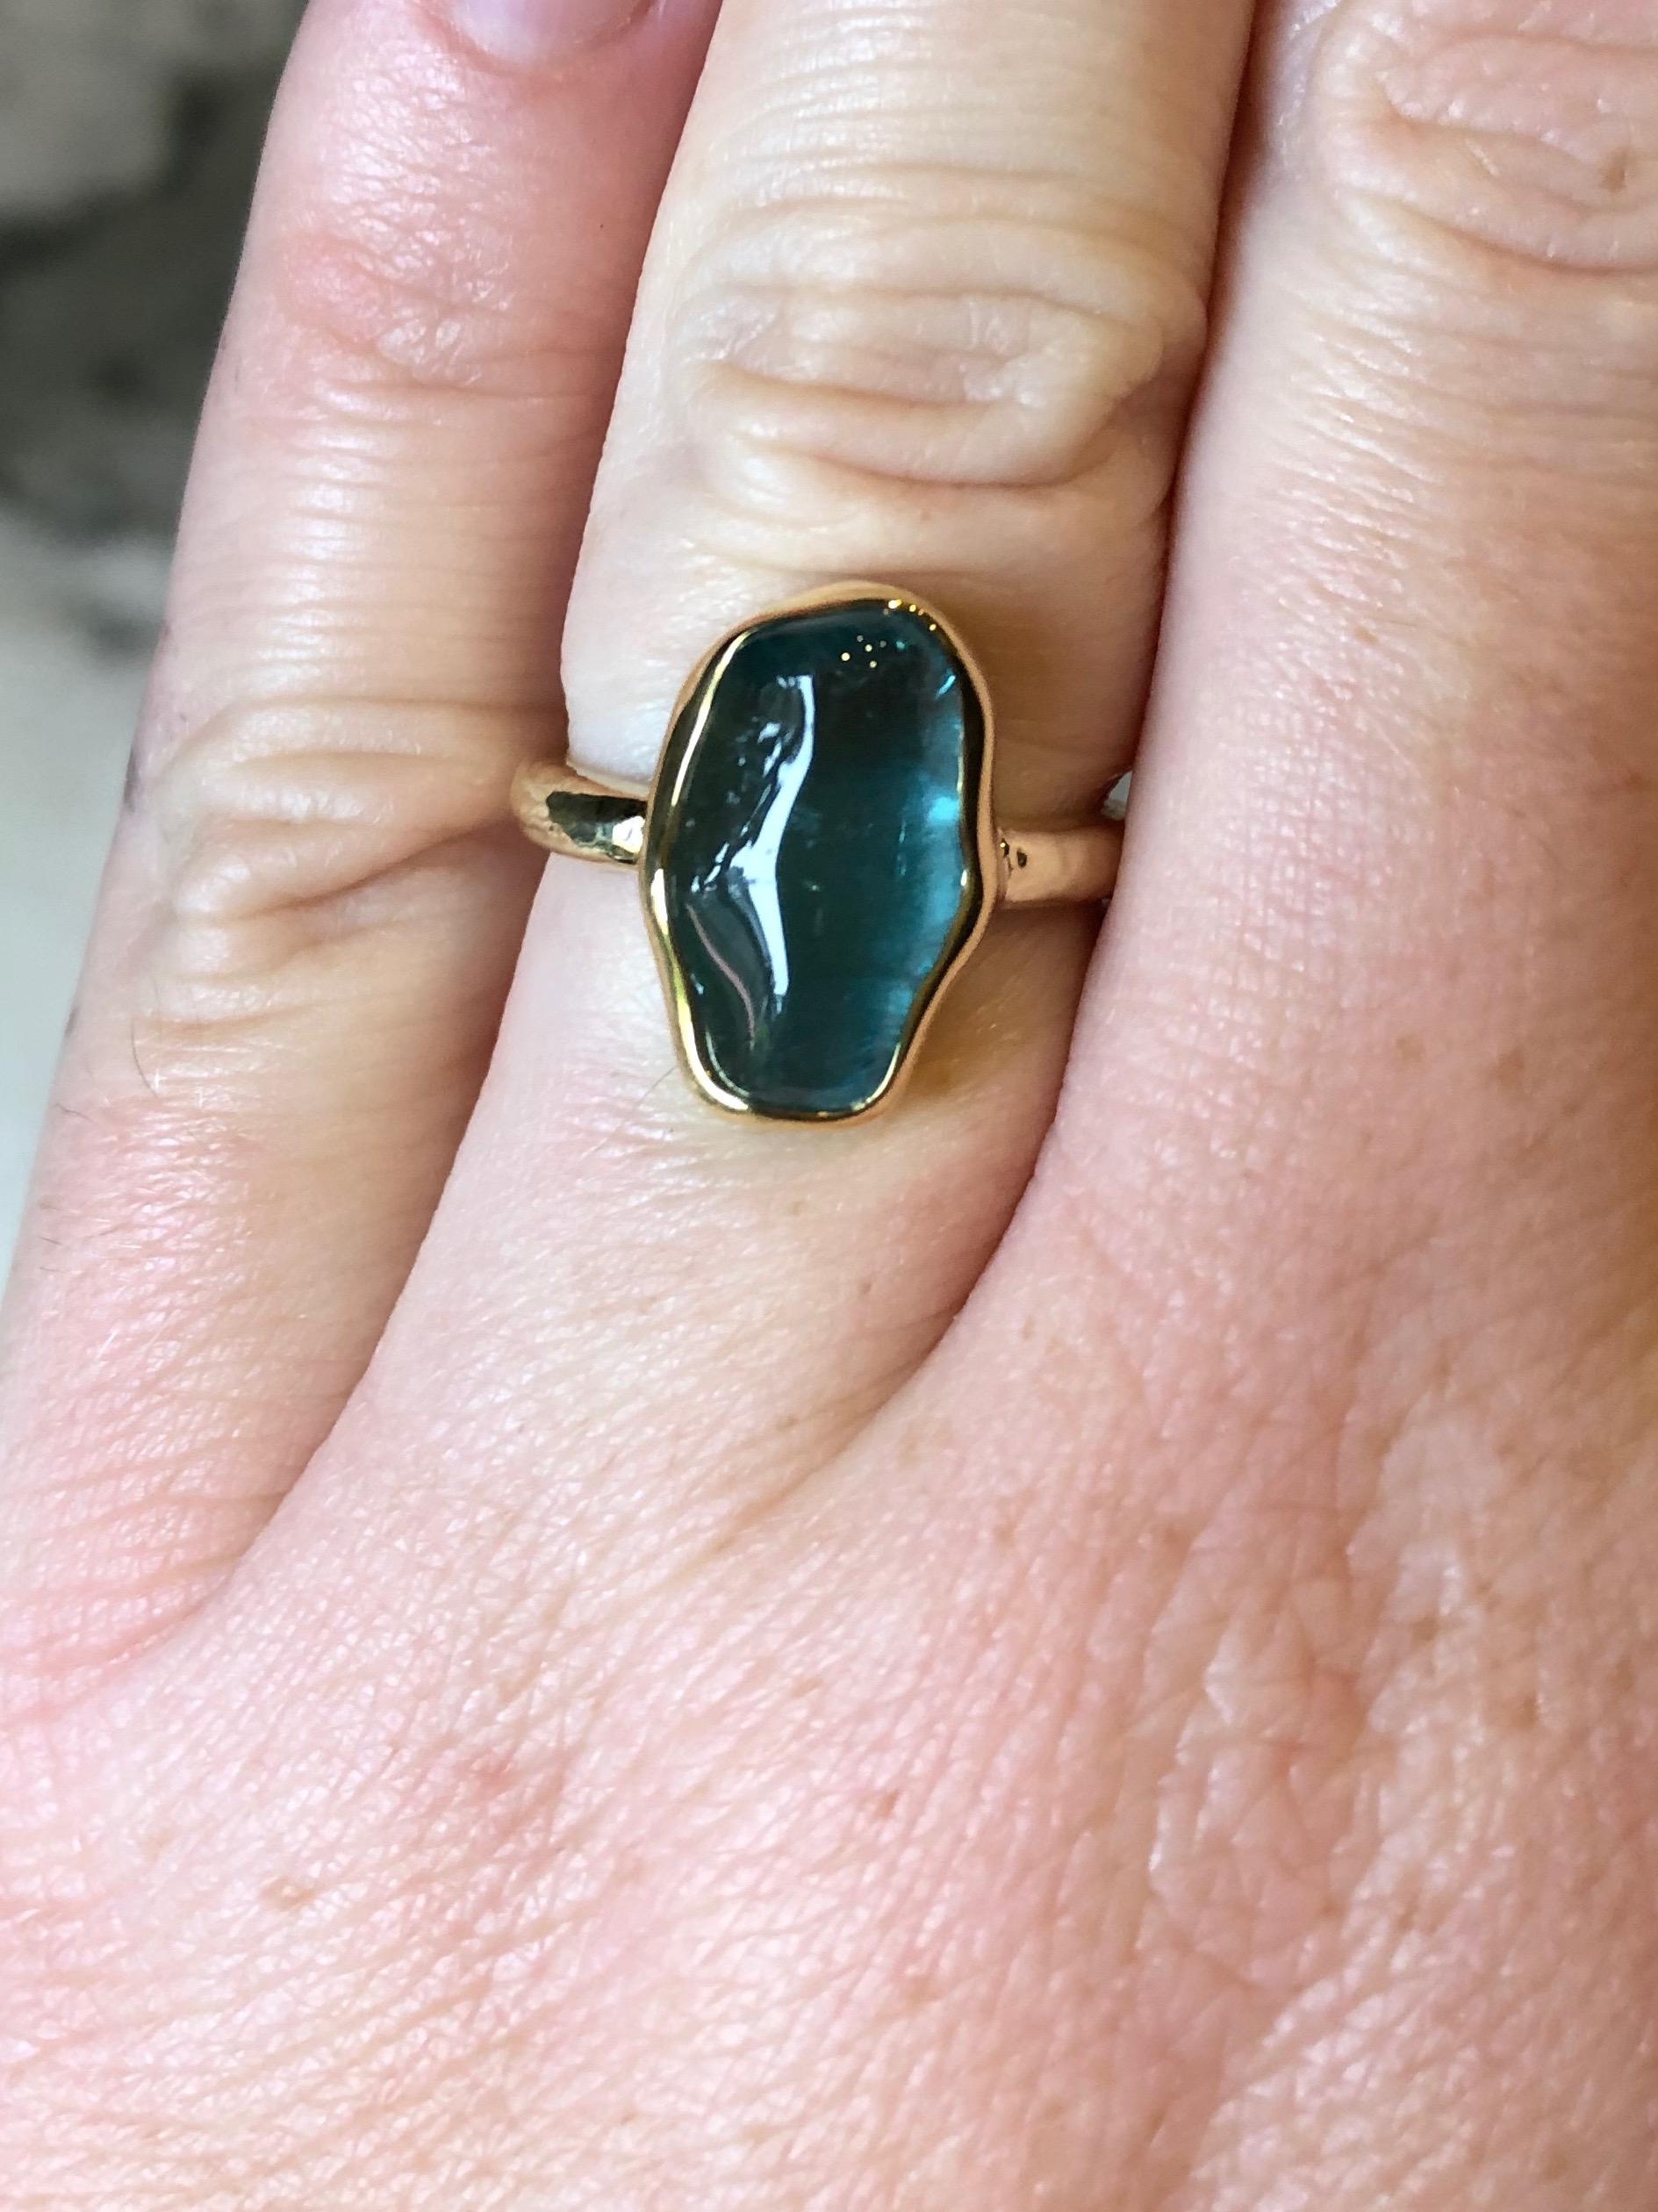 Performs miraculously in every light; a glacial blue. German cut baroque indicolite tourmaline in our hand fabricated 100% recycled gold 18 karat setting. Part of our baroque gem collection. Polished bezel, hand hammered shank.

Indicolite